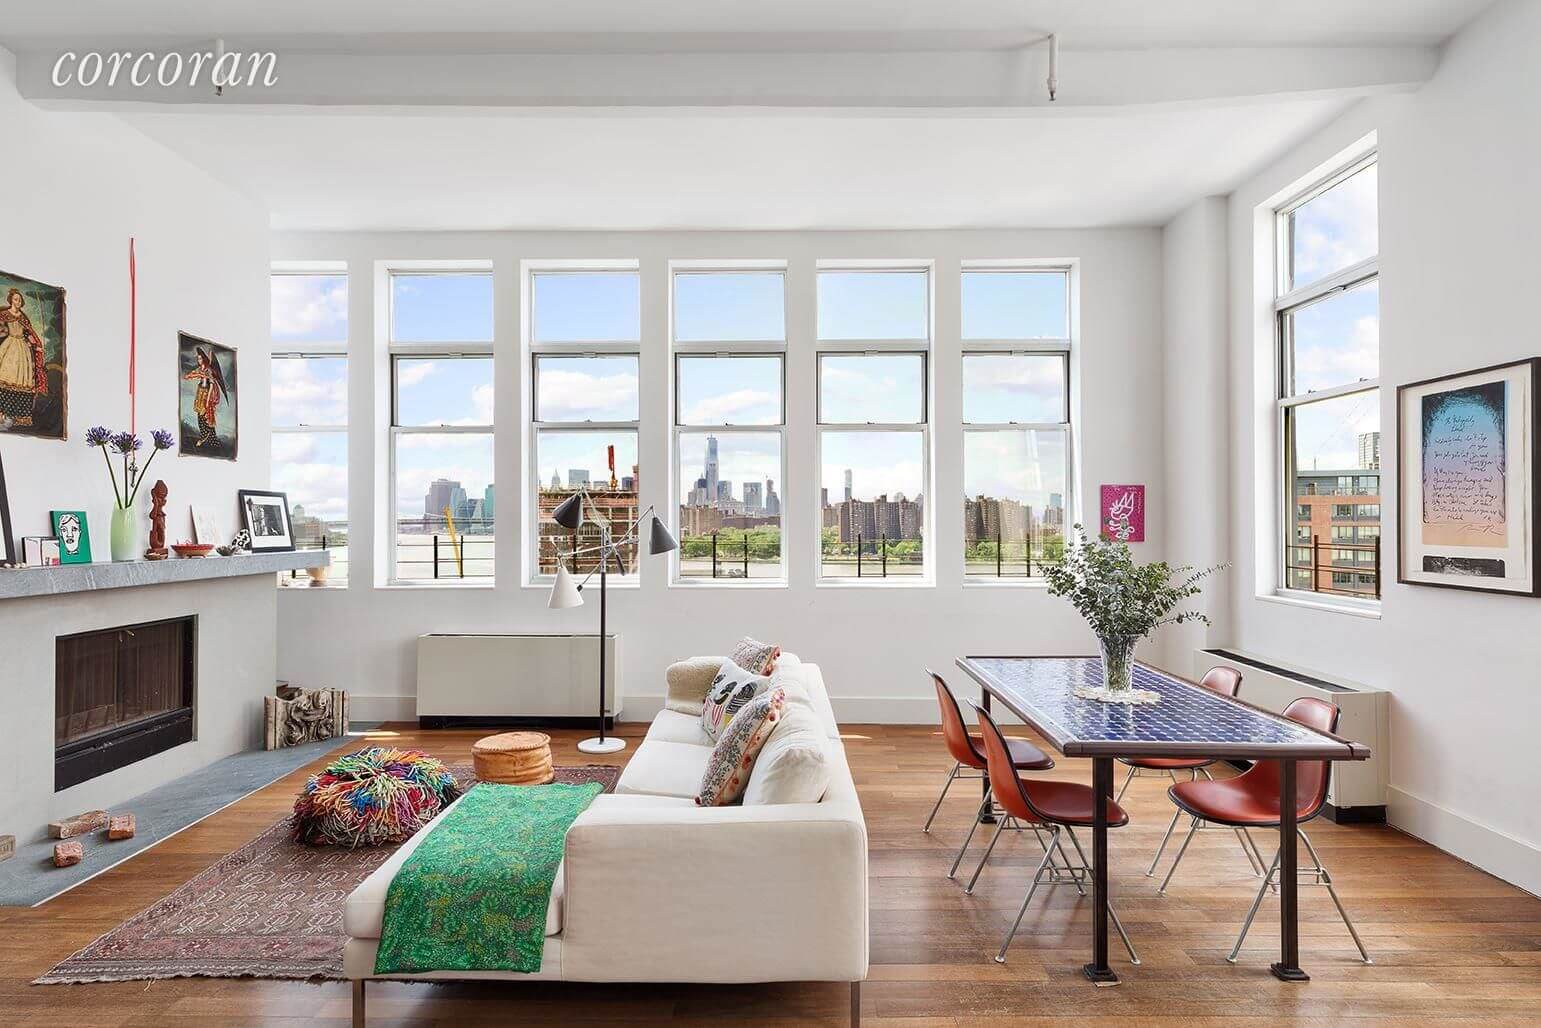 Brooklyn Apartments for Sale in Williamsburg at 60 Broadway